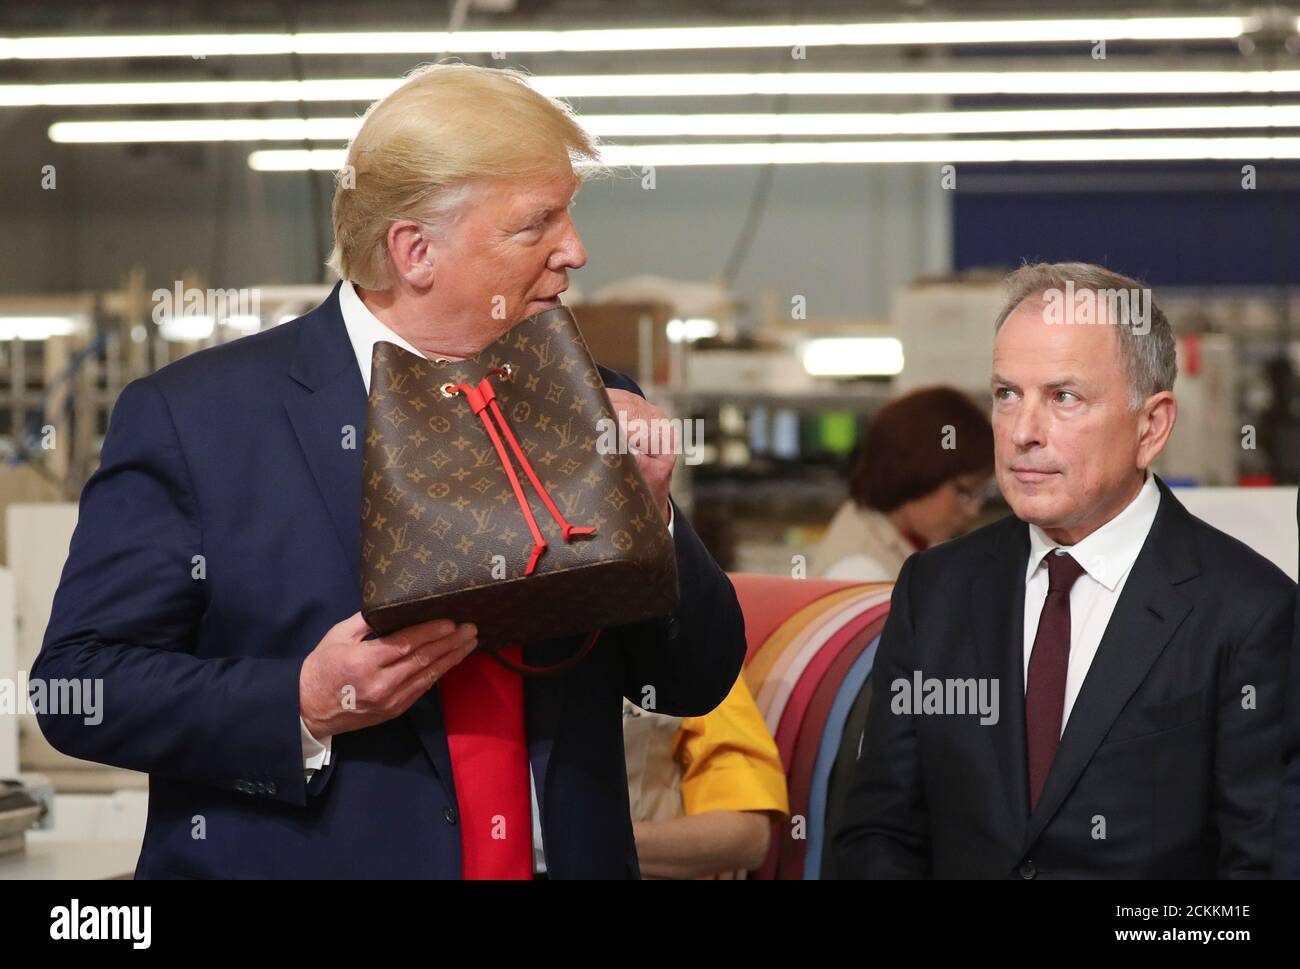 U.S. President Donald Trump holds a purse as Louis Vuitton's CEO Michael  Burke looks on during a visit to the Louis Vuitton Rochambeau Ranch leather  workshop in Keene, Texas, U.S. October 17,